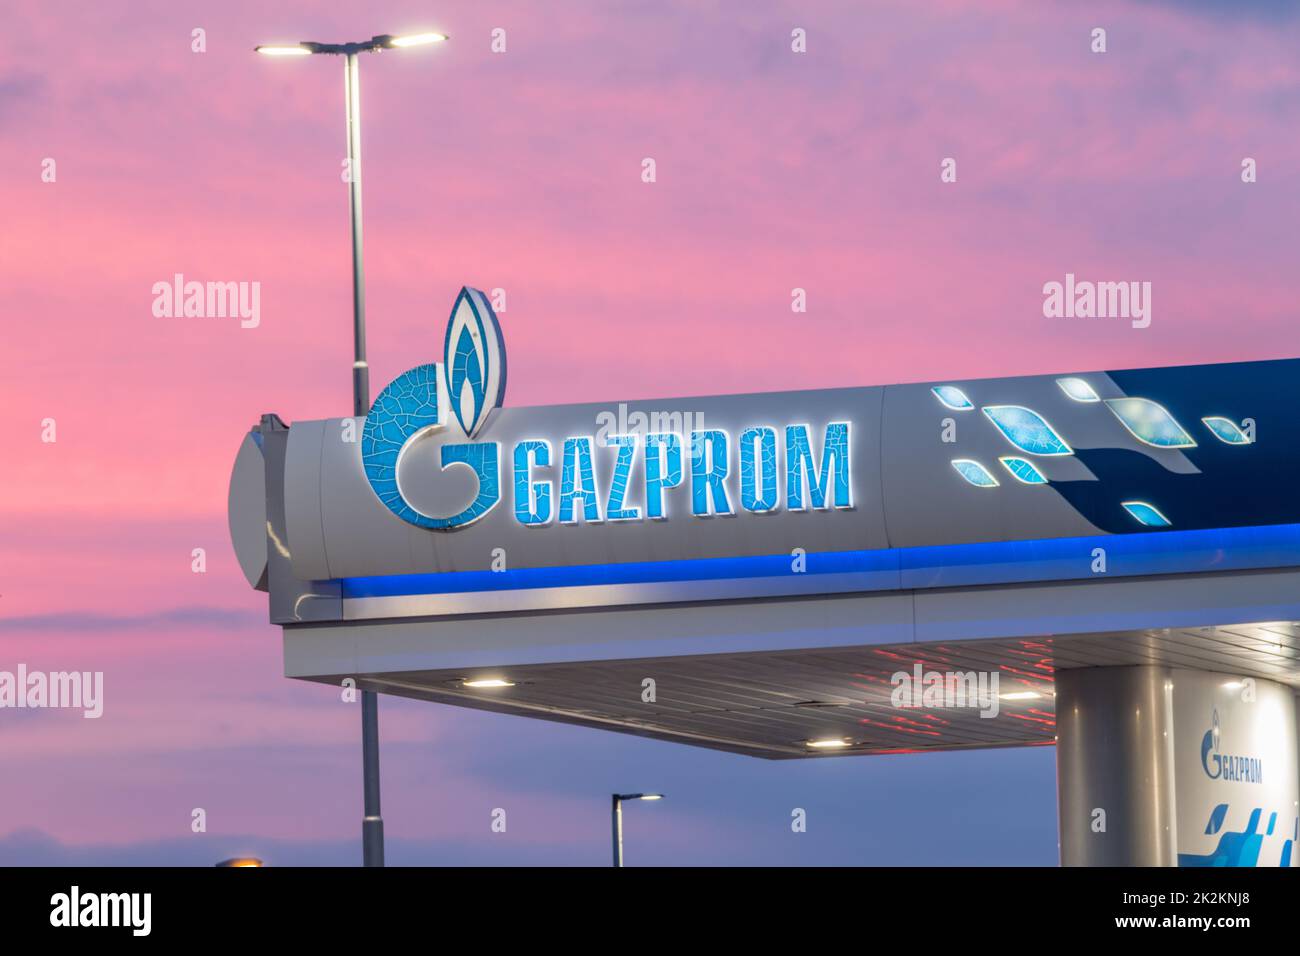 Gornja Toponica, Serbia - June 6, 2022: Logo and sign of Gazprom at gas station. Gazprom is a Russian majority state-owned multinational energy corpor Stock Photo